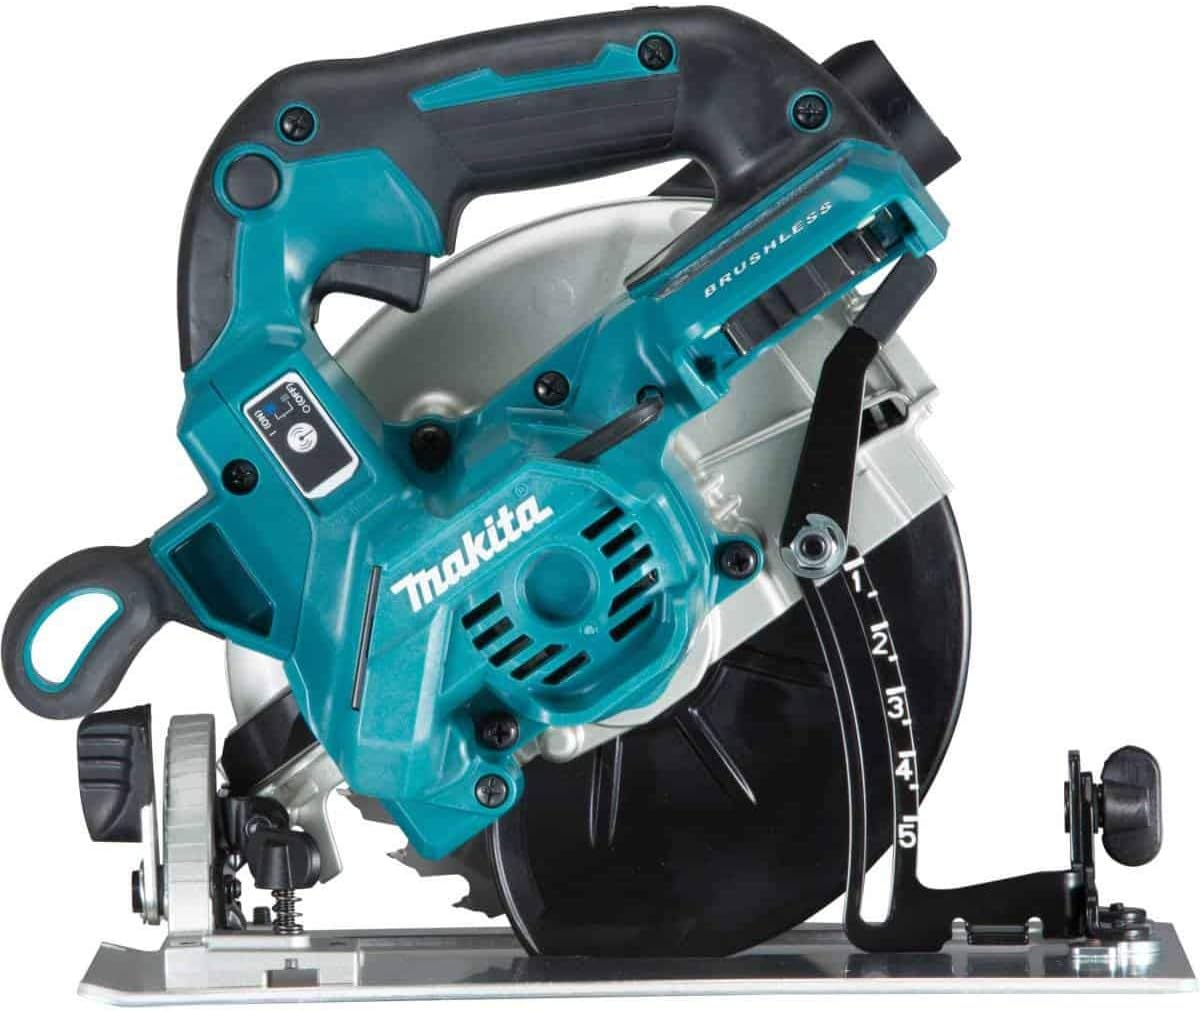 Makita DHS661ZU 18V Li-Ion LXT Brushless 165mm Circular Saw - Compact and powerful saw with brushless motor for impressive runtime. Features Auto-start Wireless System (AWS) for on-demand dust extraction. Automatic Torque Drive Technology (ADT) provides optimal cutting speed. Includes LED job light, soft start, and bevel cutting capacity. Lightweight design with improved blade tip visibility. Ideal for a wide range of trades. Voltage: 18V. Blade Diameter: 165mm. Max Cutting Capacity at 0°: 57mm. Net Weight: